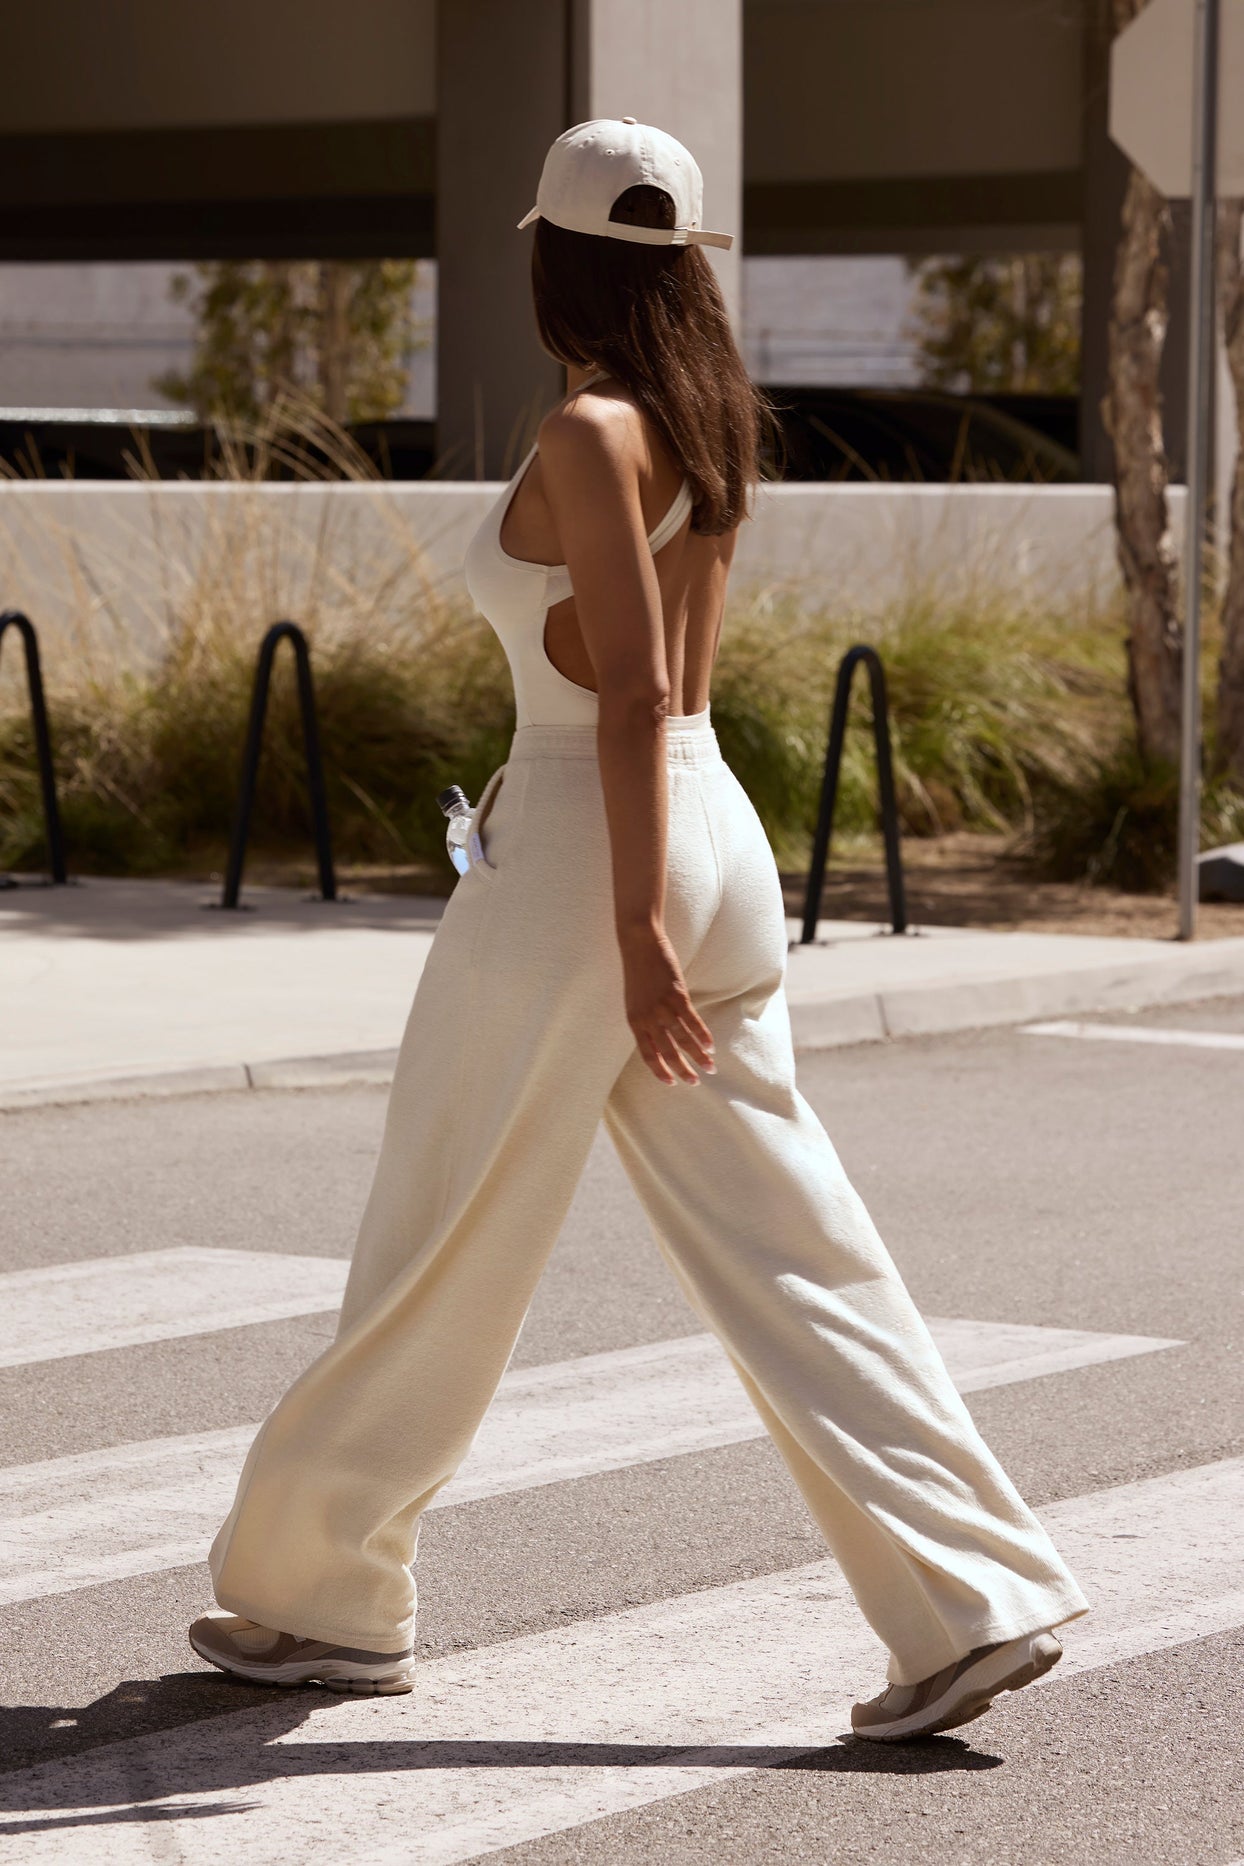 Petite Terry Towelling Wide-Leg Joggers in Cream